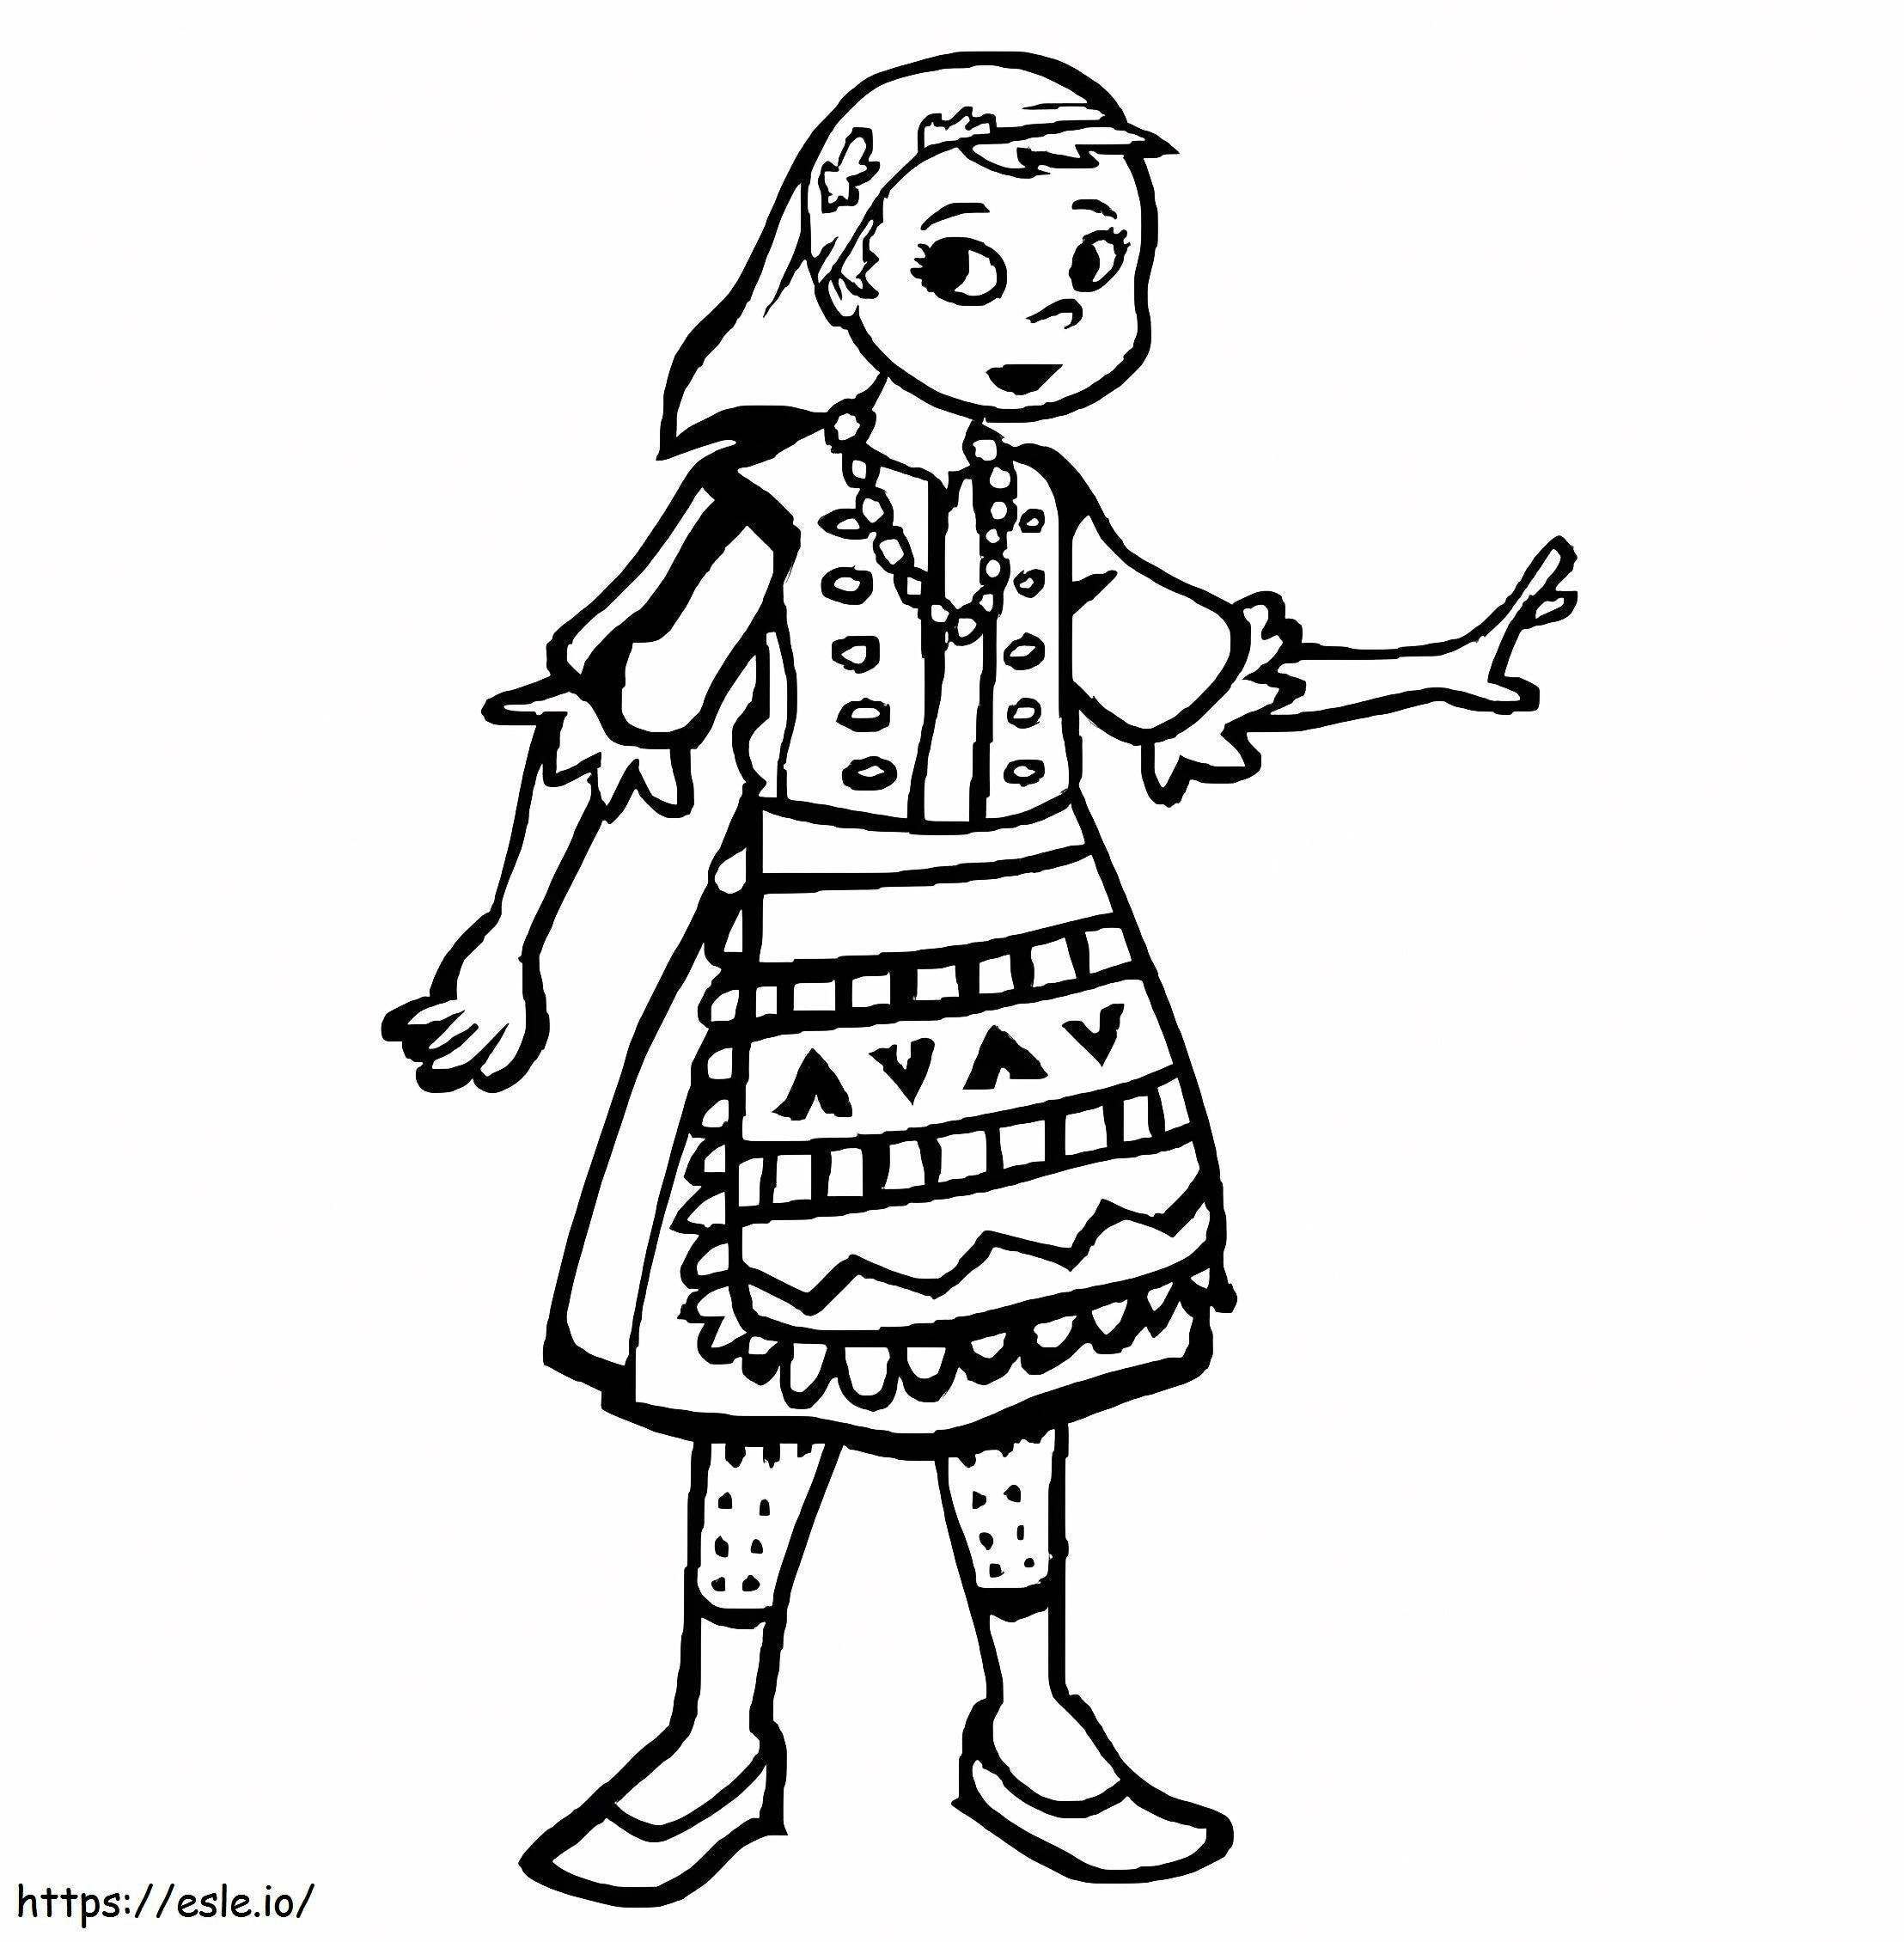 Hungarian Girl coloring page